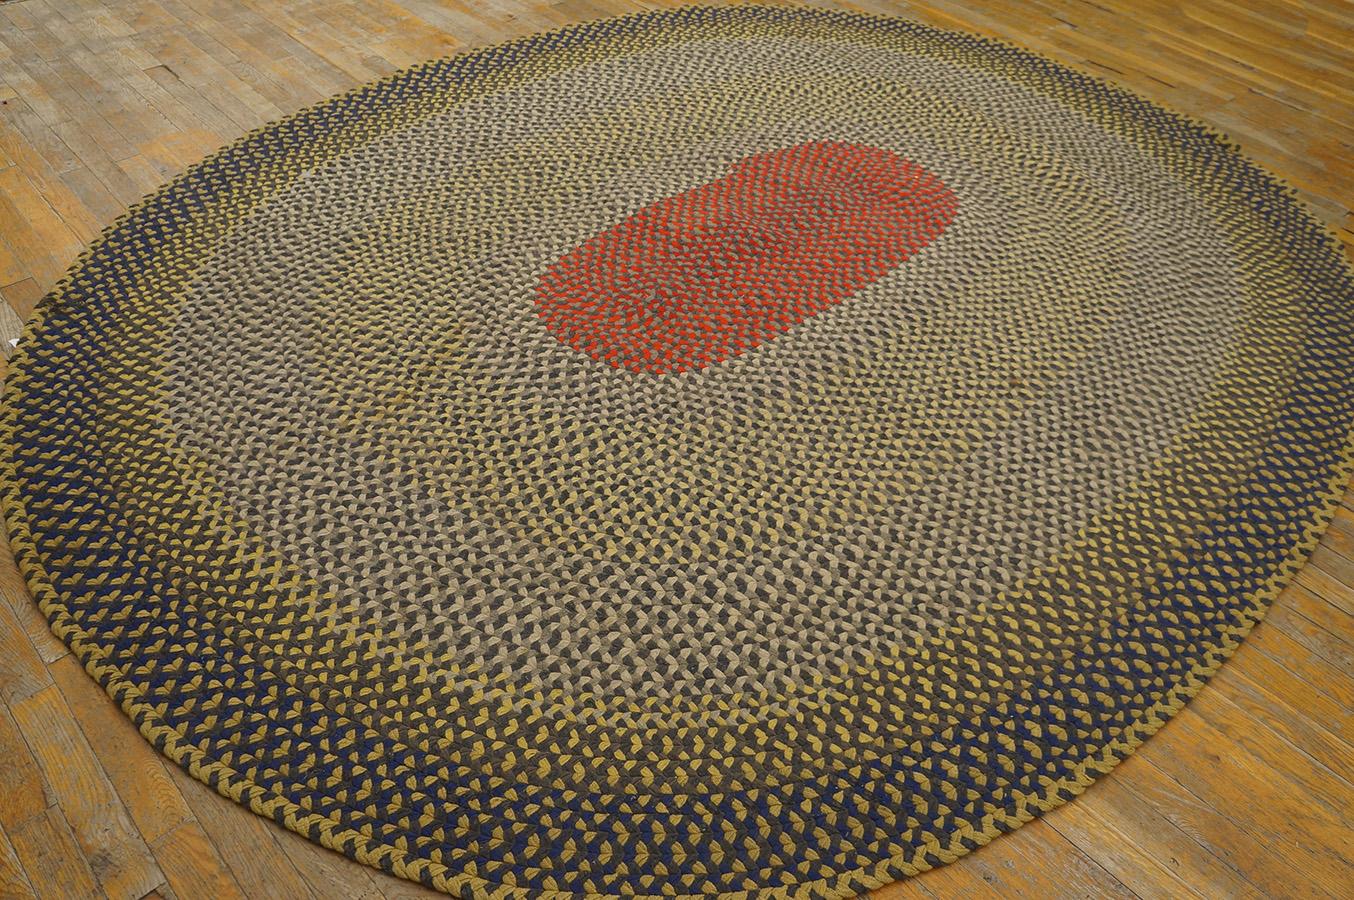 Hand-Woven 1940s American Braided Rug ( 7' 6